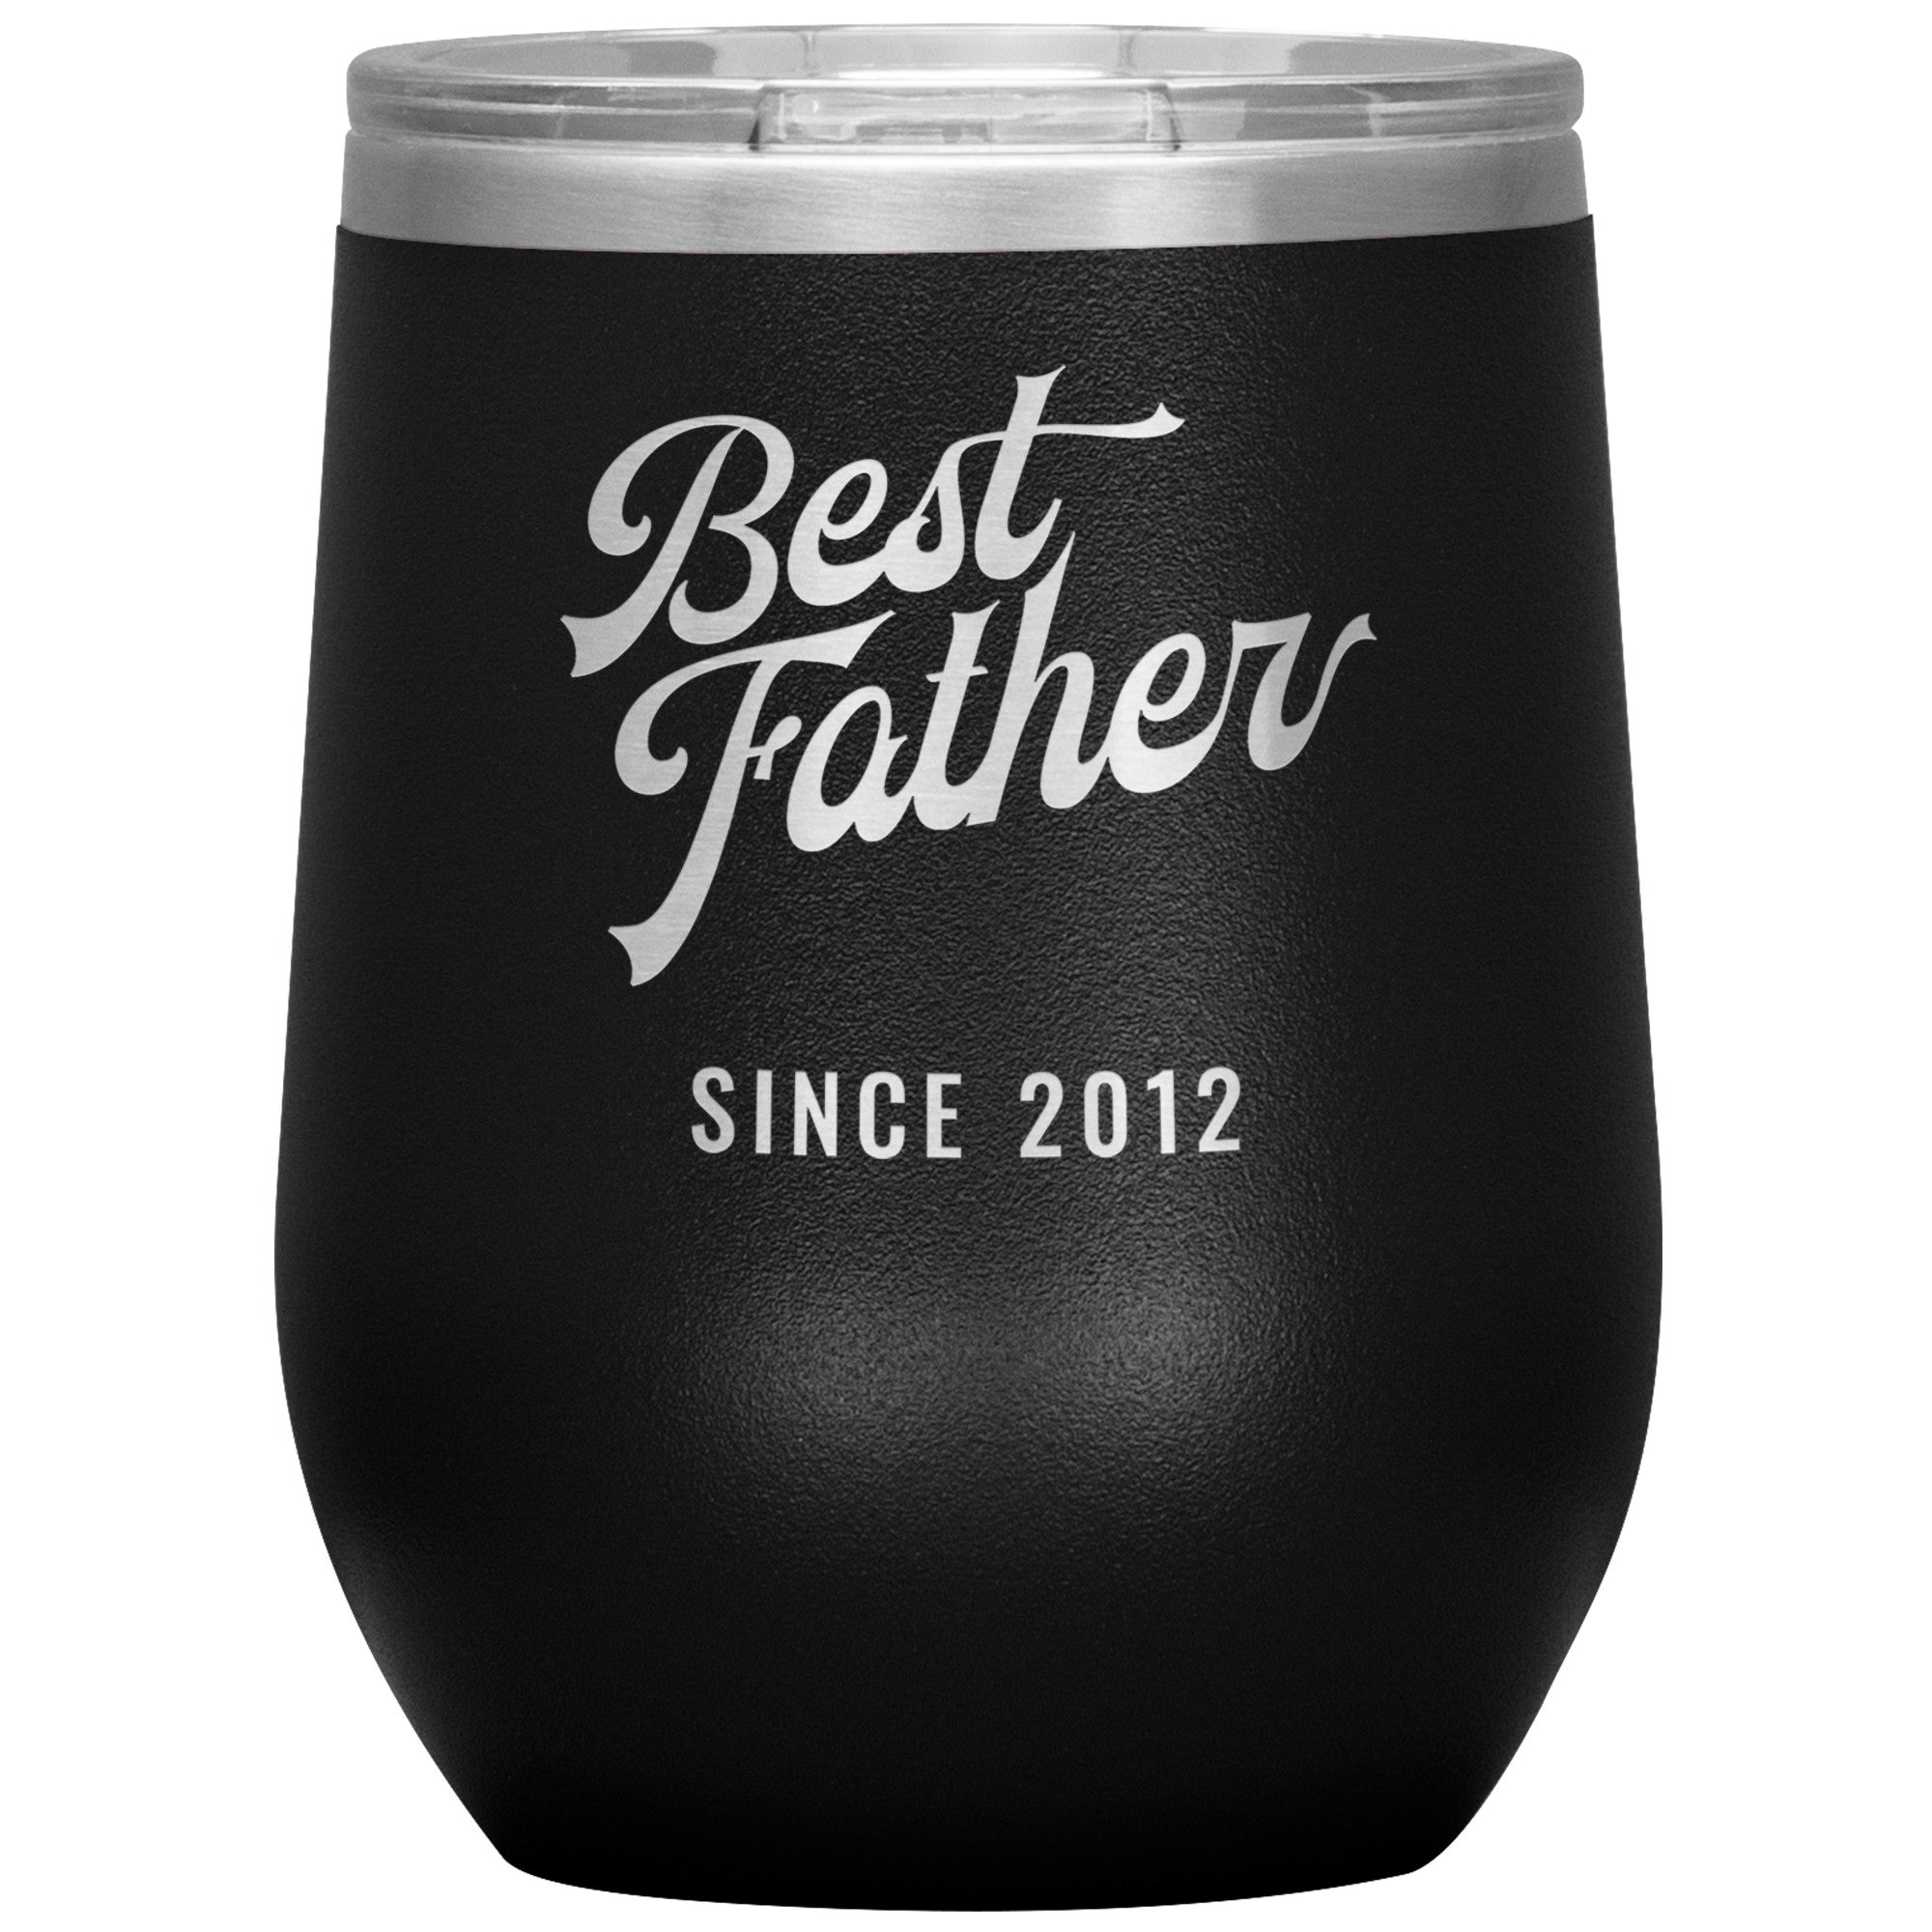 Best Father Since 2012 - 12oz Insulated Wine Tumbler